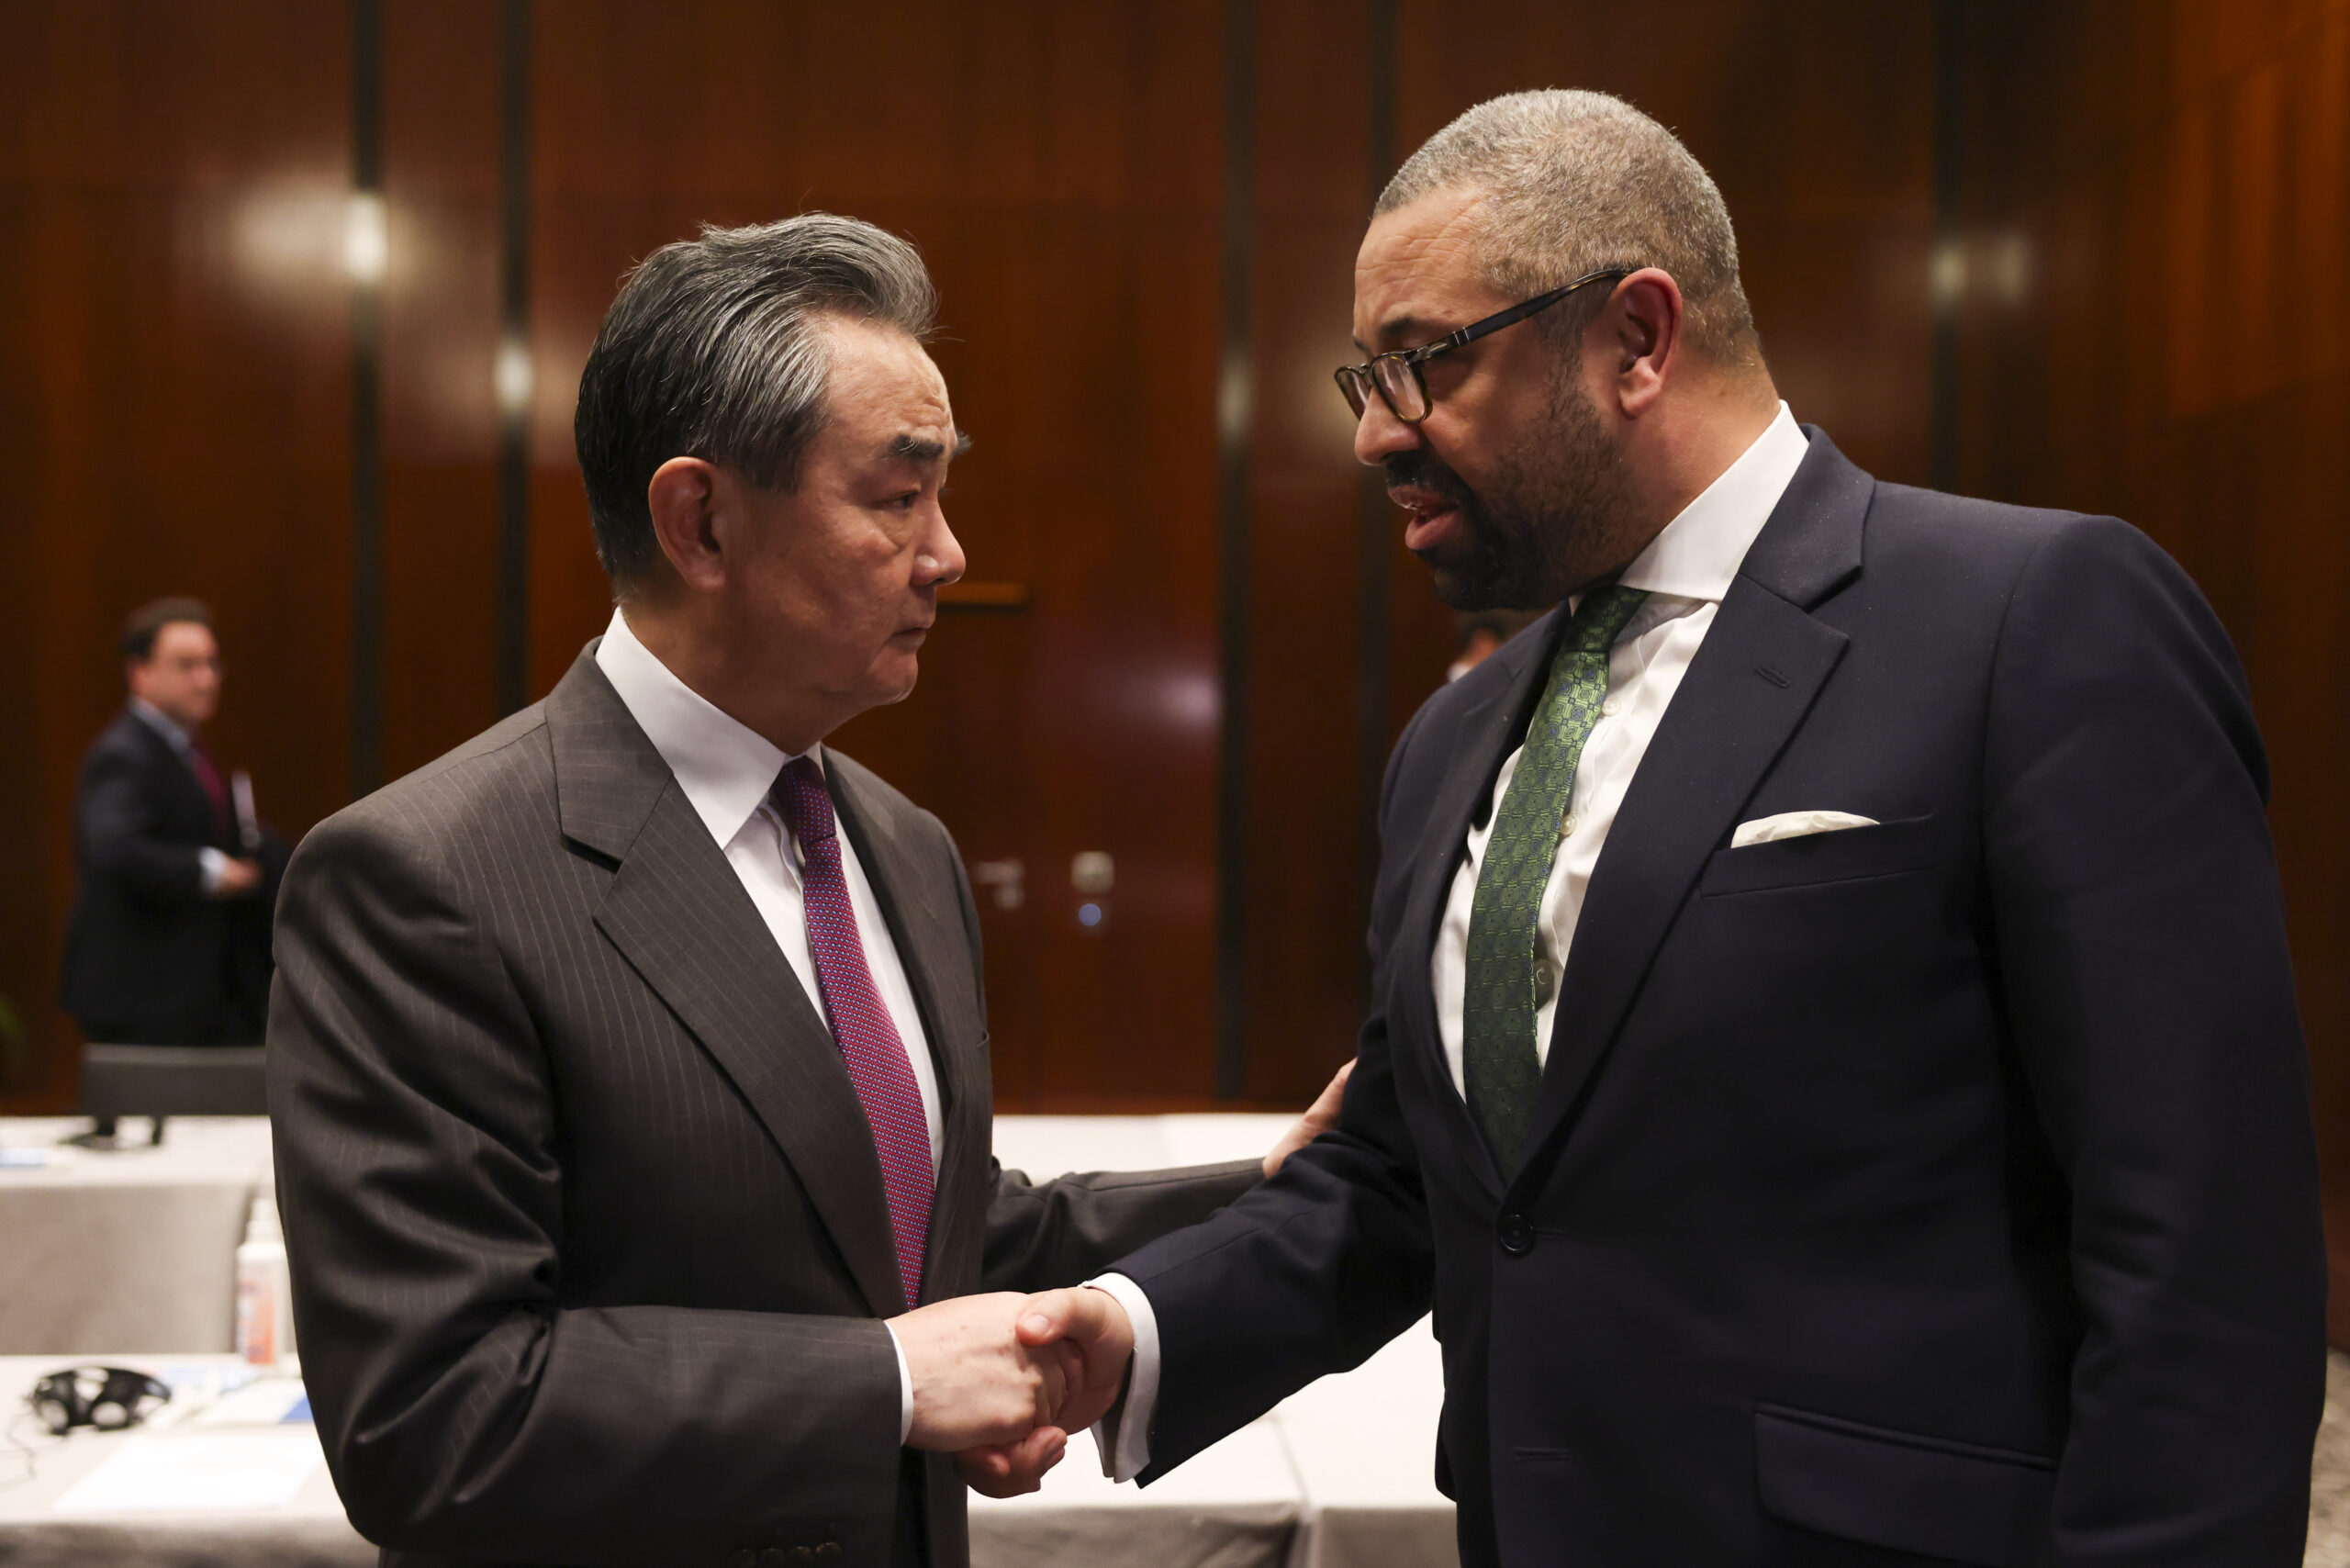 Foreign Secretary James Cleverly shakes hands with China Foreign Minister Wang Yi